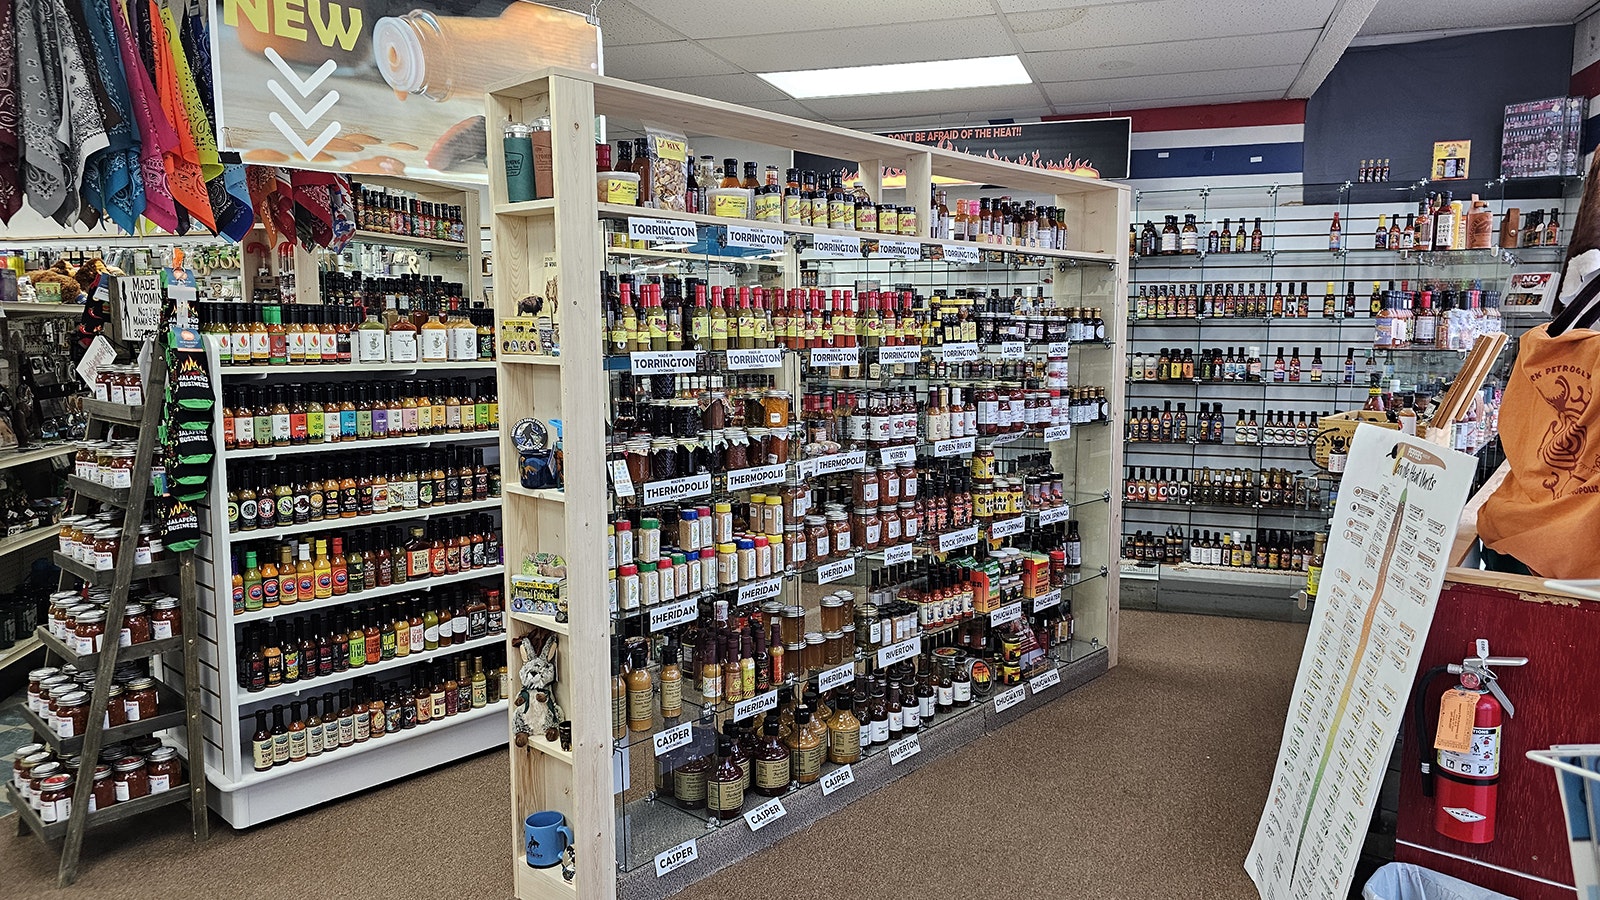 Discover Thermopolis carries a range of souvenirs for tourists, but its real claim to fame are shelf after shelf of hot sauces — more than 2,000 in all.